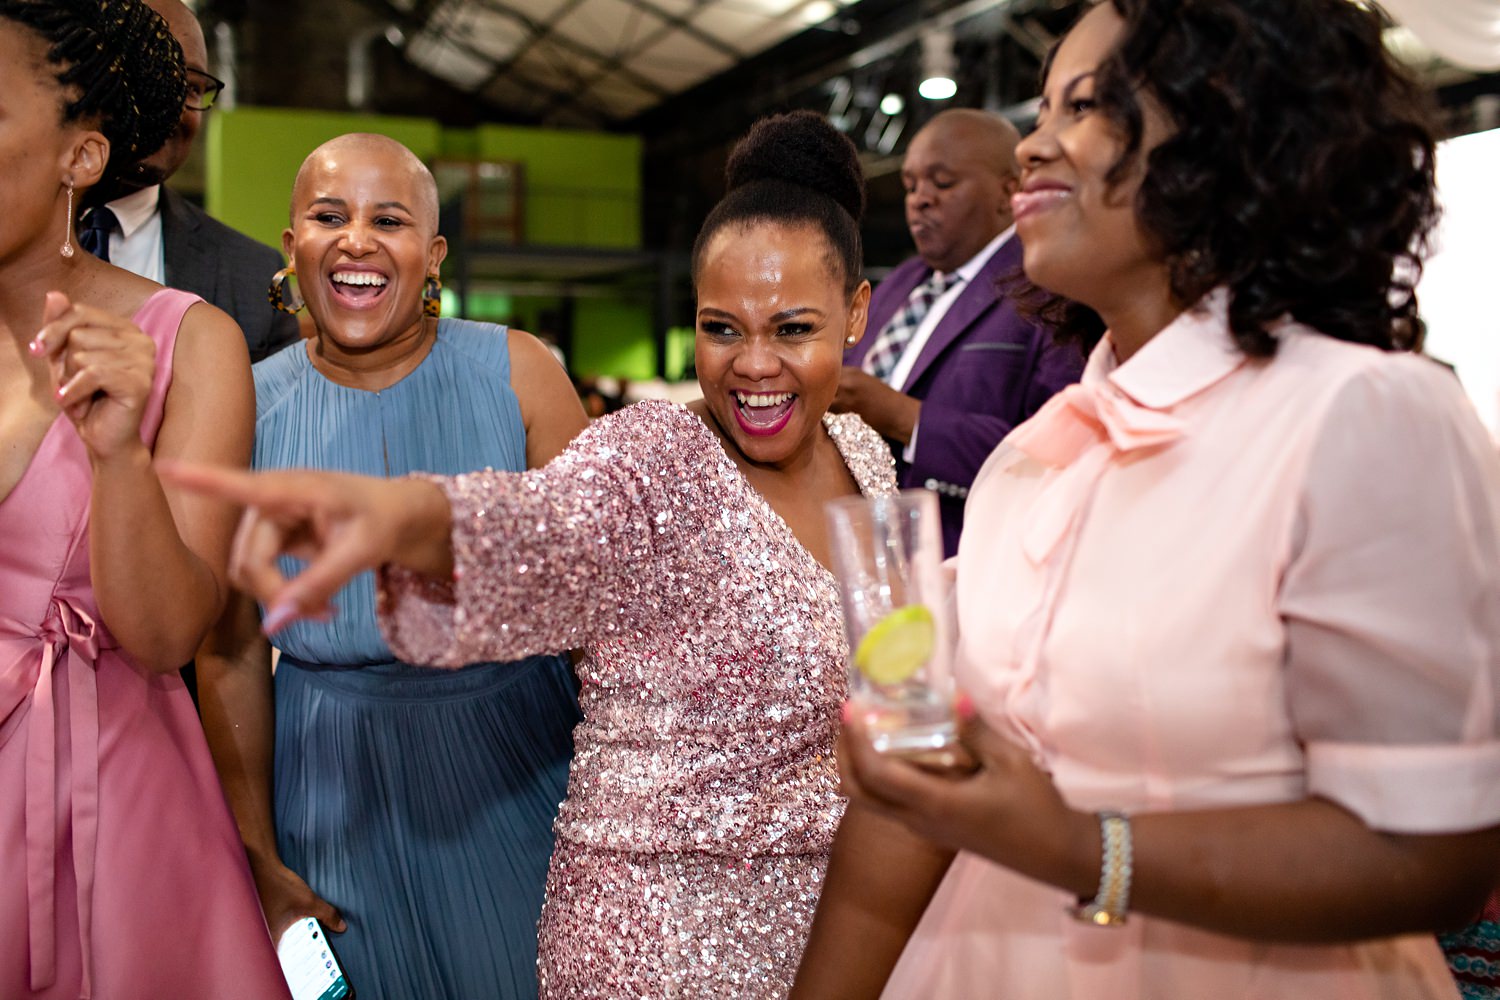 A woman in a pink sequin top dances and points in this fun wedding dancefloor moment by wedding photographer in South Africa, Niki M Photography